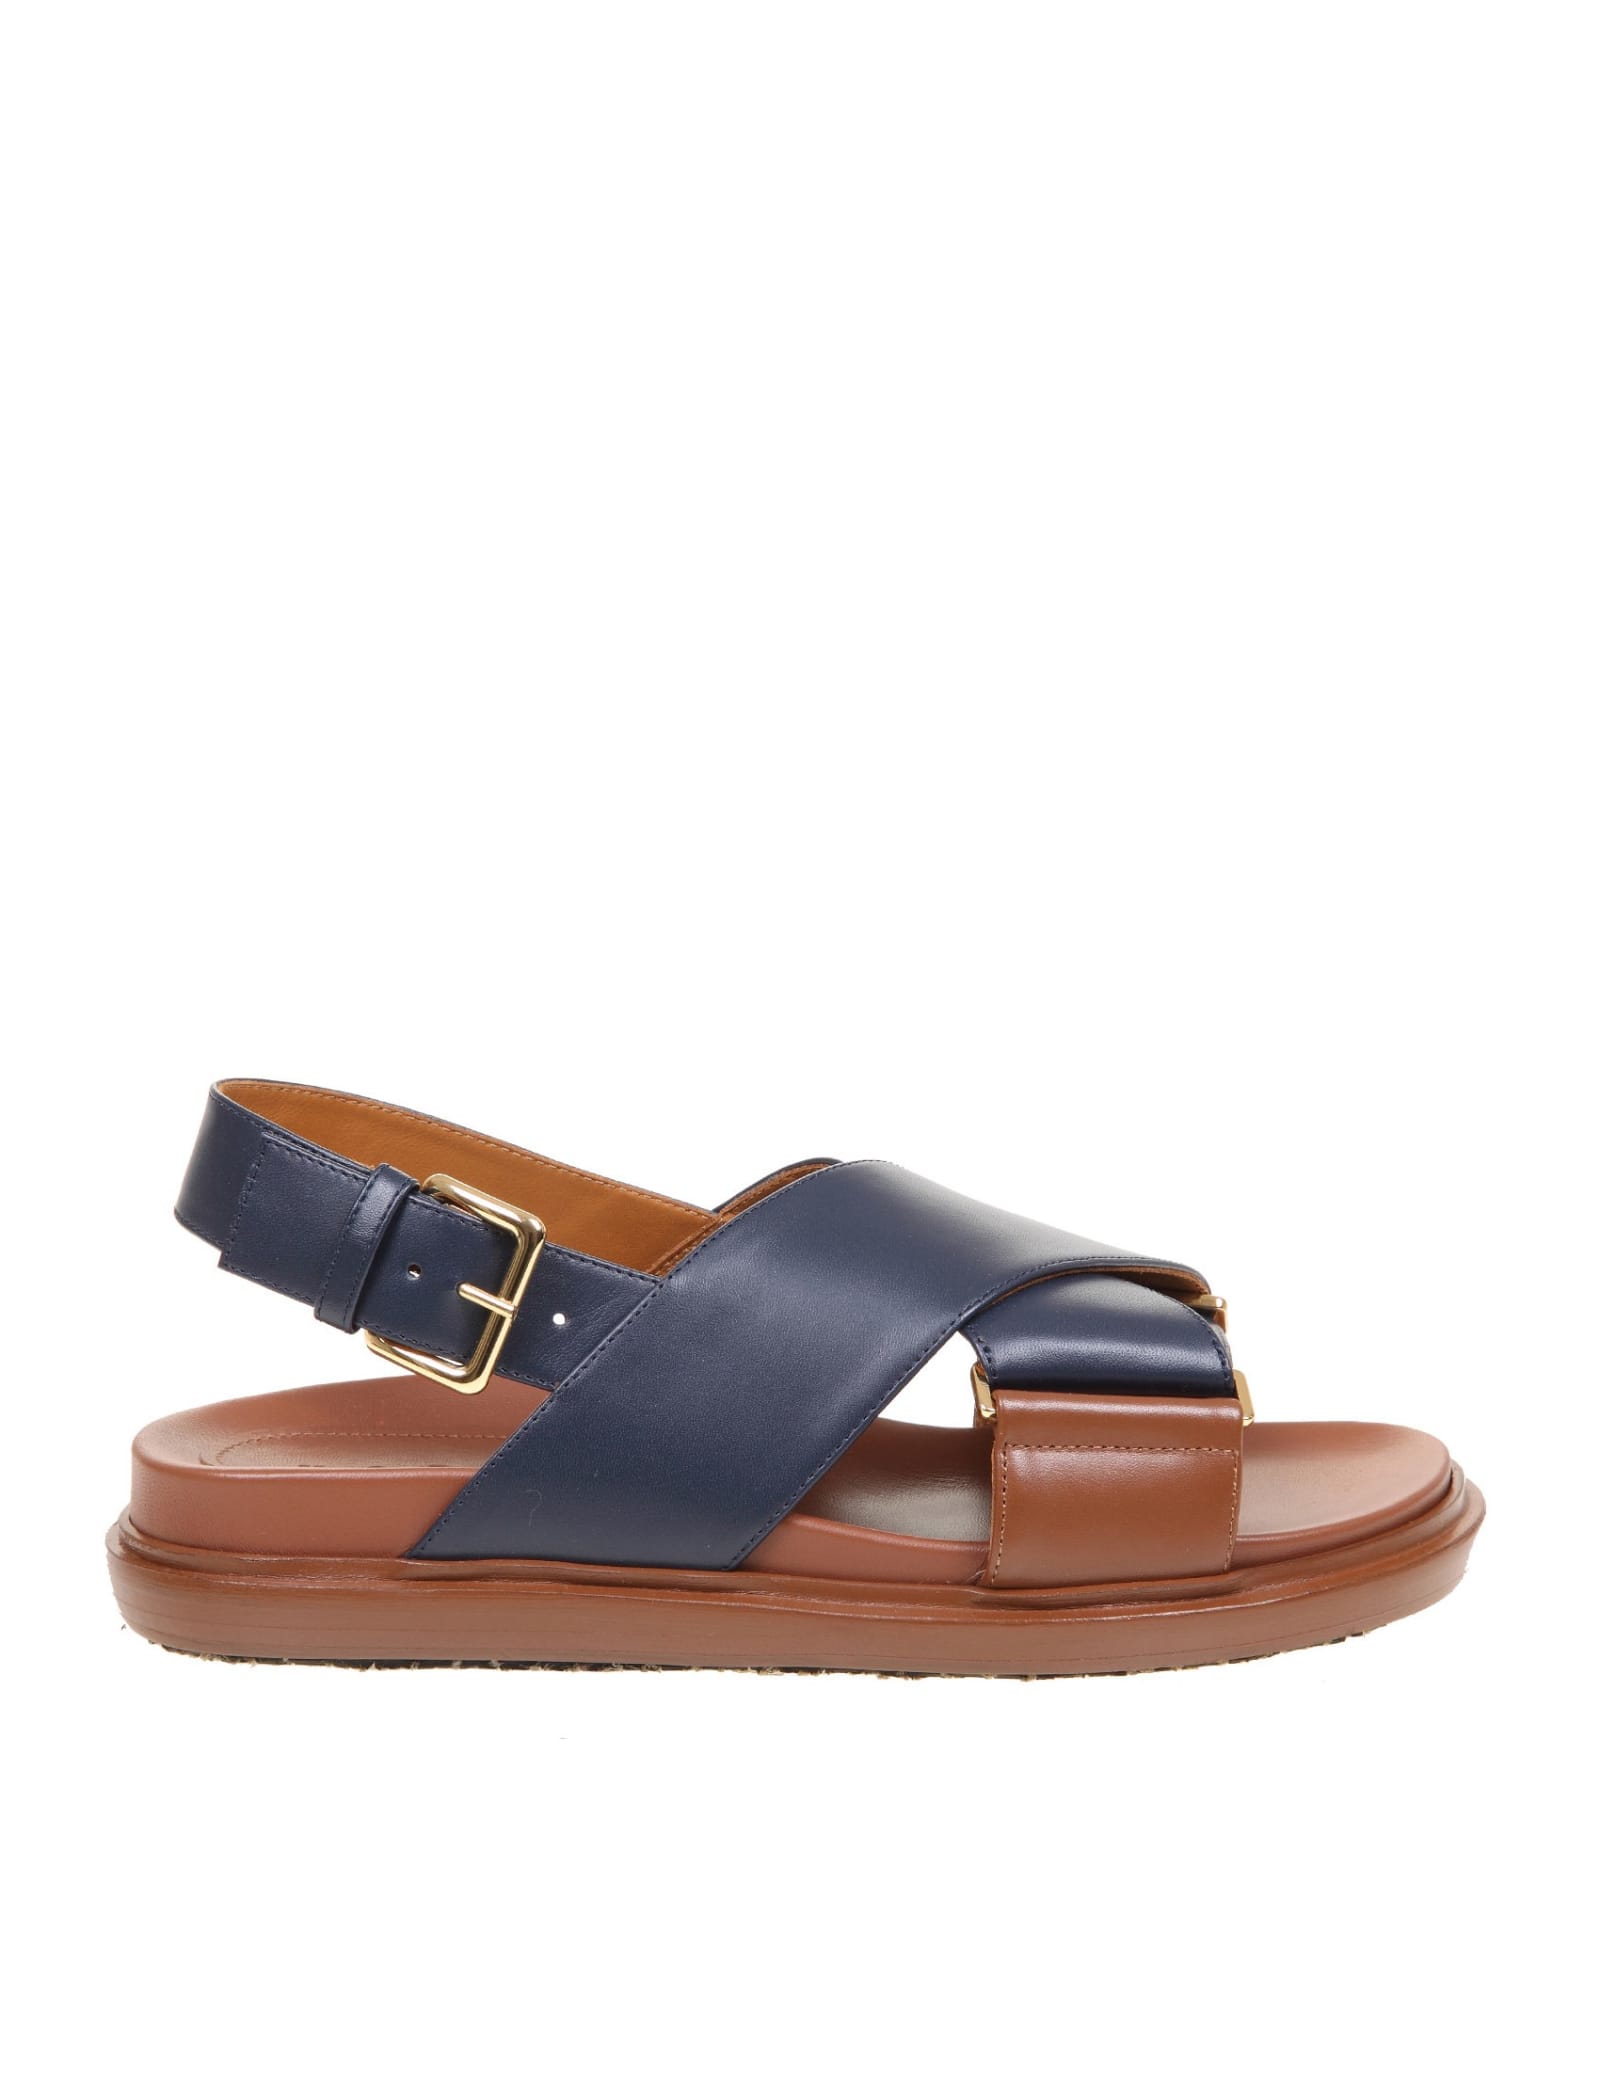 Buy Marni Fussbett Sandal In Blue Leather And Leather online, shop Marni shoes with free shipping